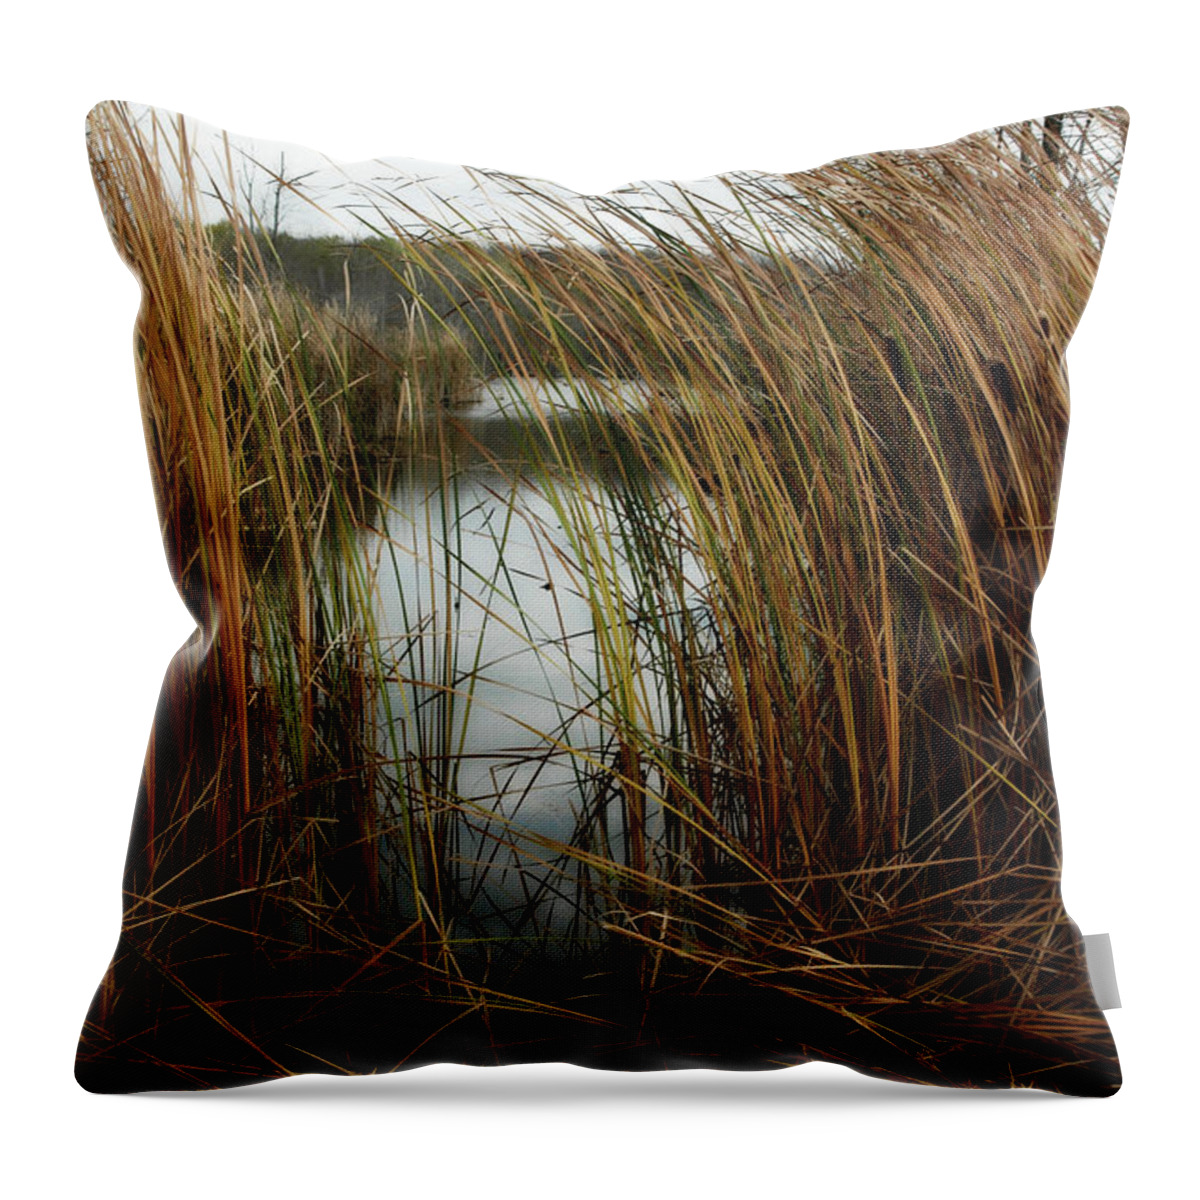 Reeds Throw Pillow featuring the photograph A Glimpse by Rhonda Barrett